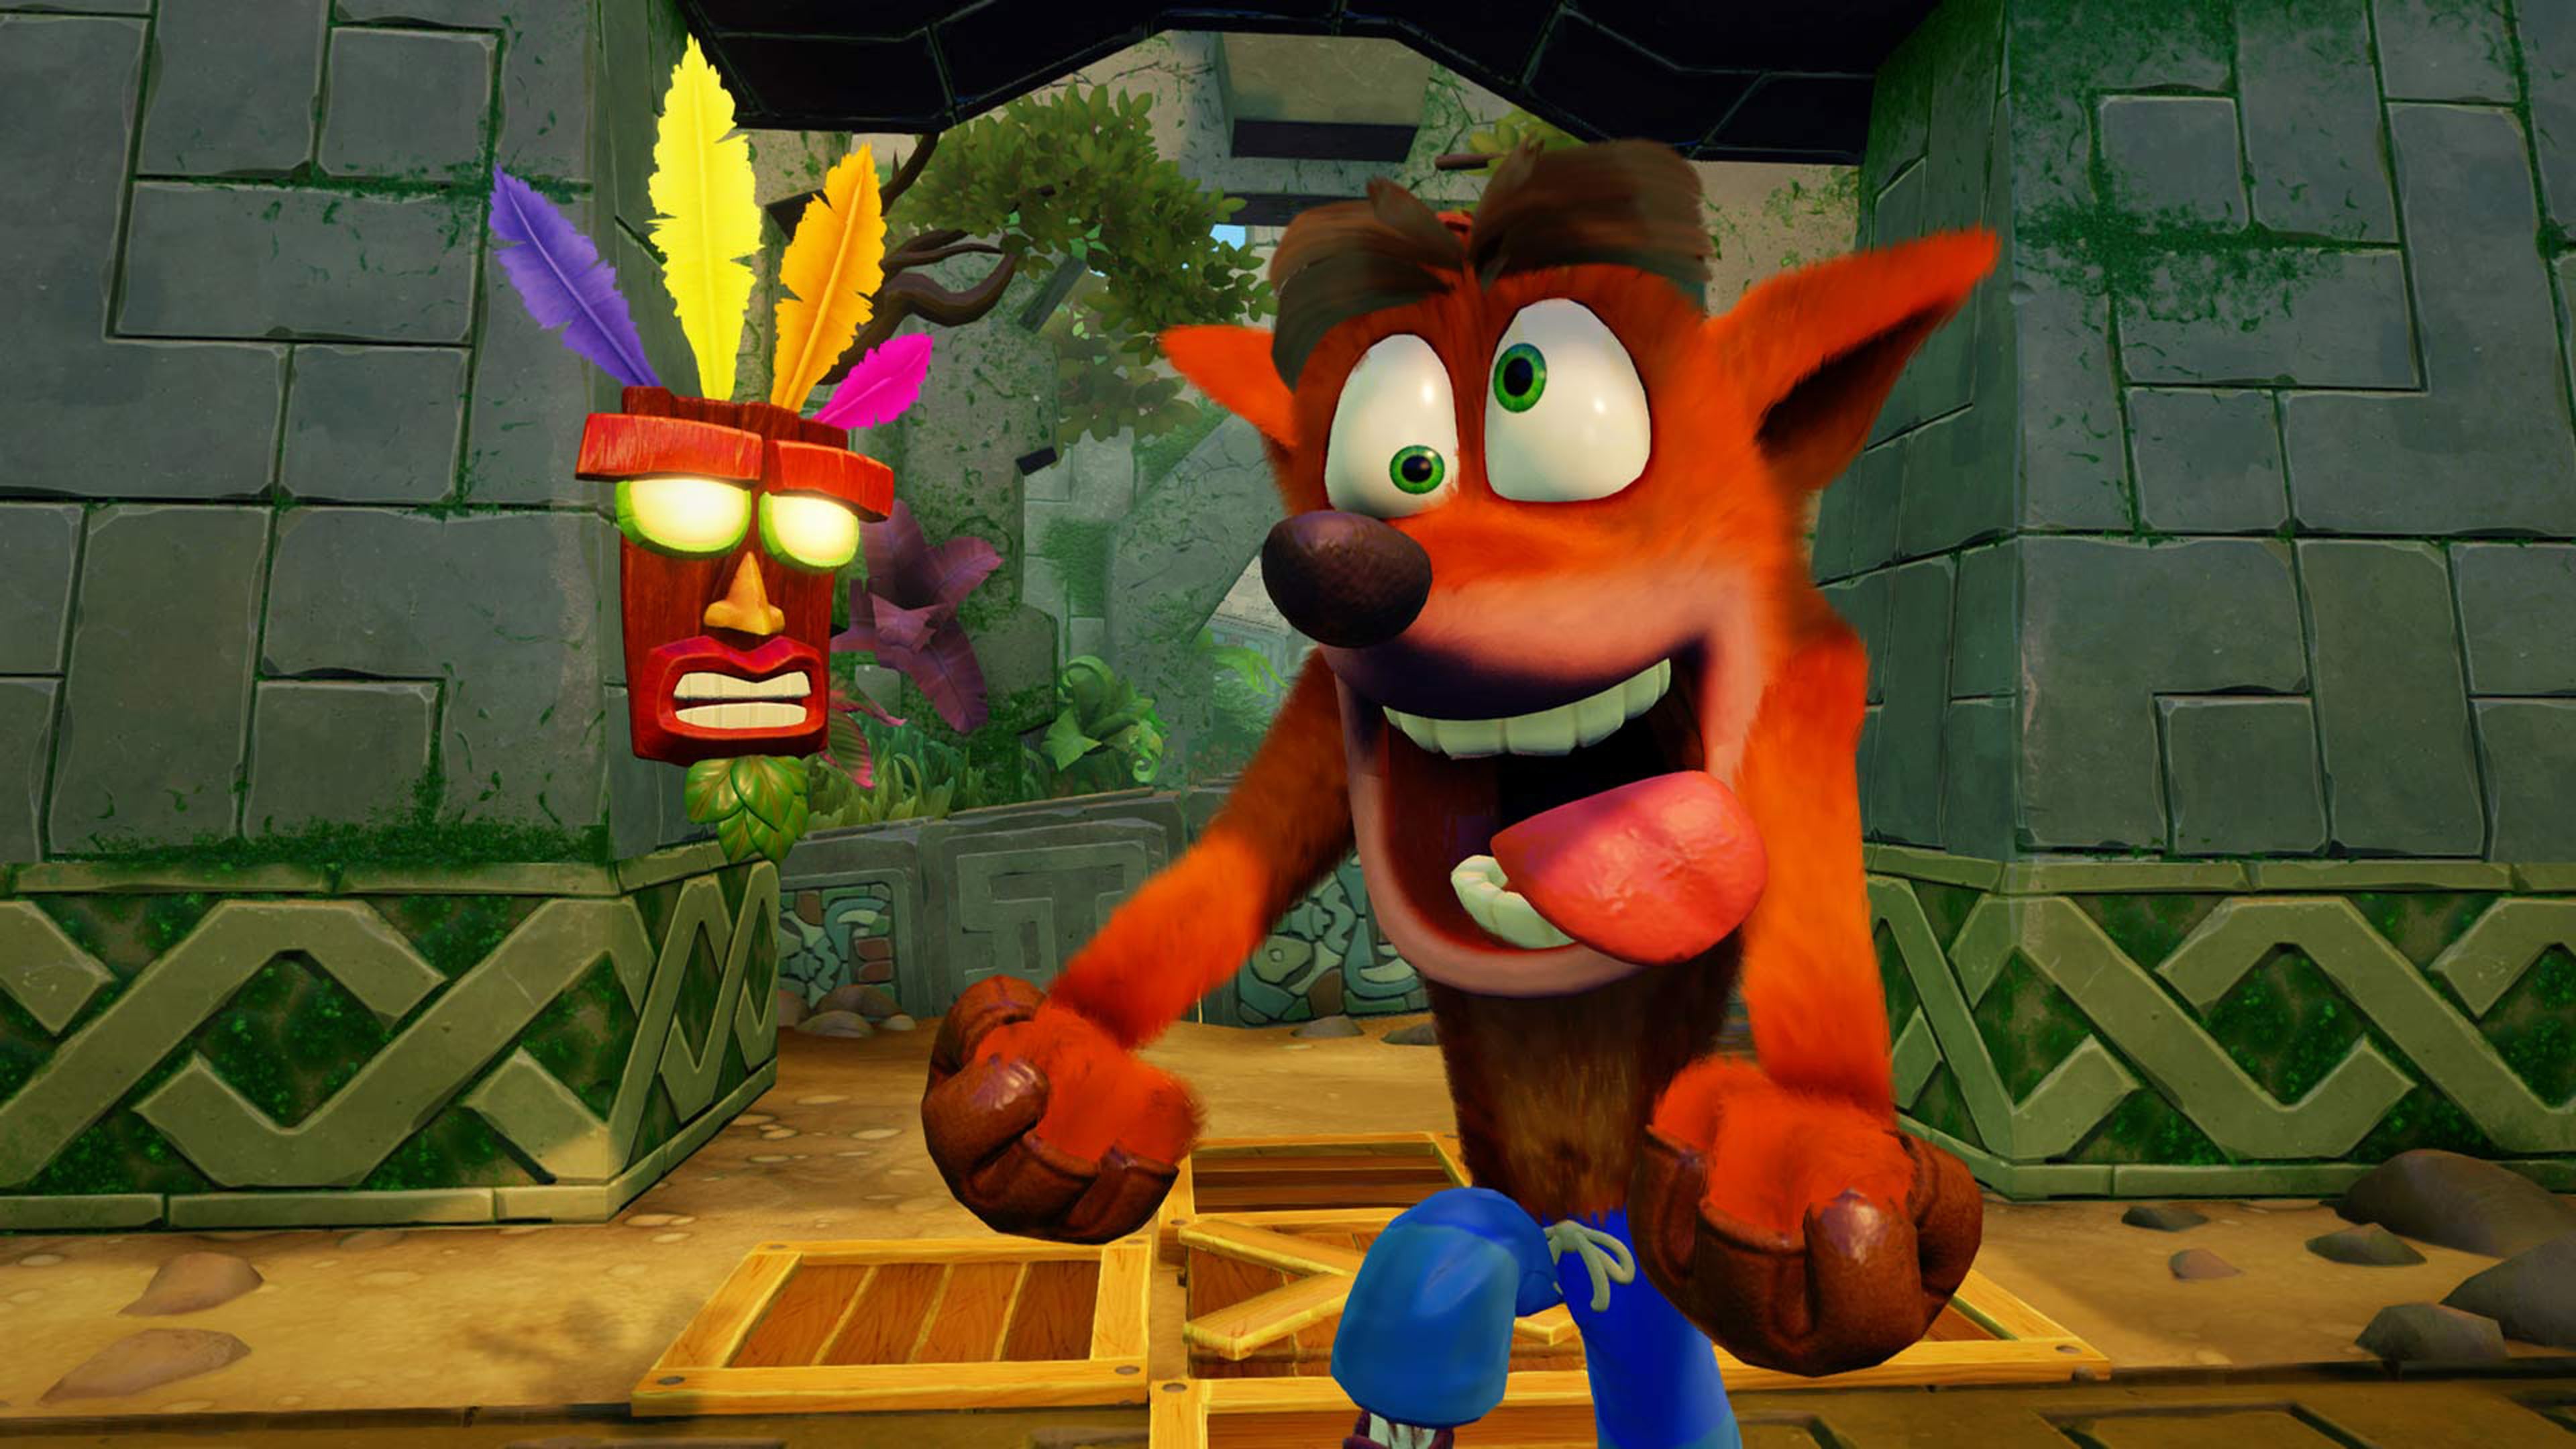 Crash Bandicoot 4: It's About Time - Playstation 4/5 : Target